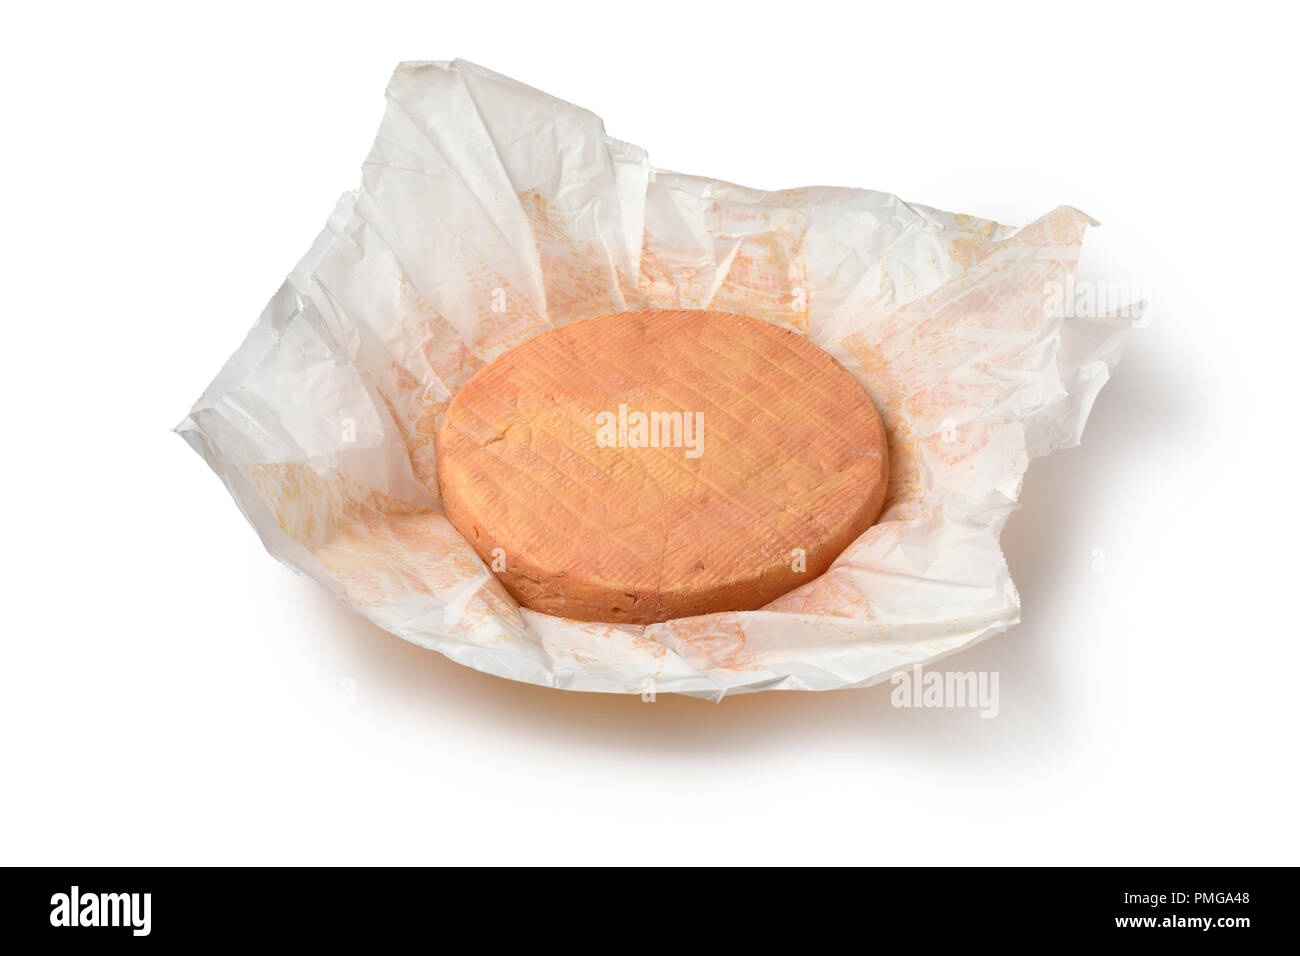 Whole traditional French Munster cheese in paper isolated on white background Stock Photo